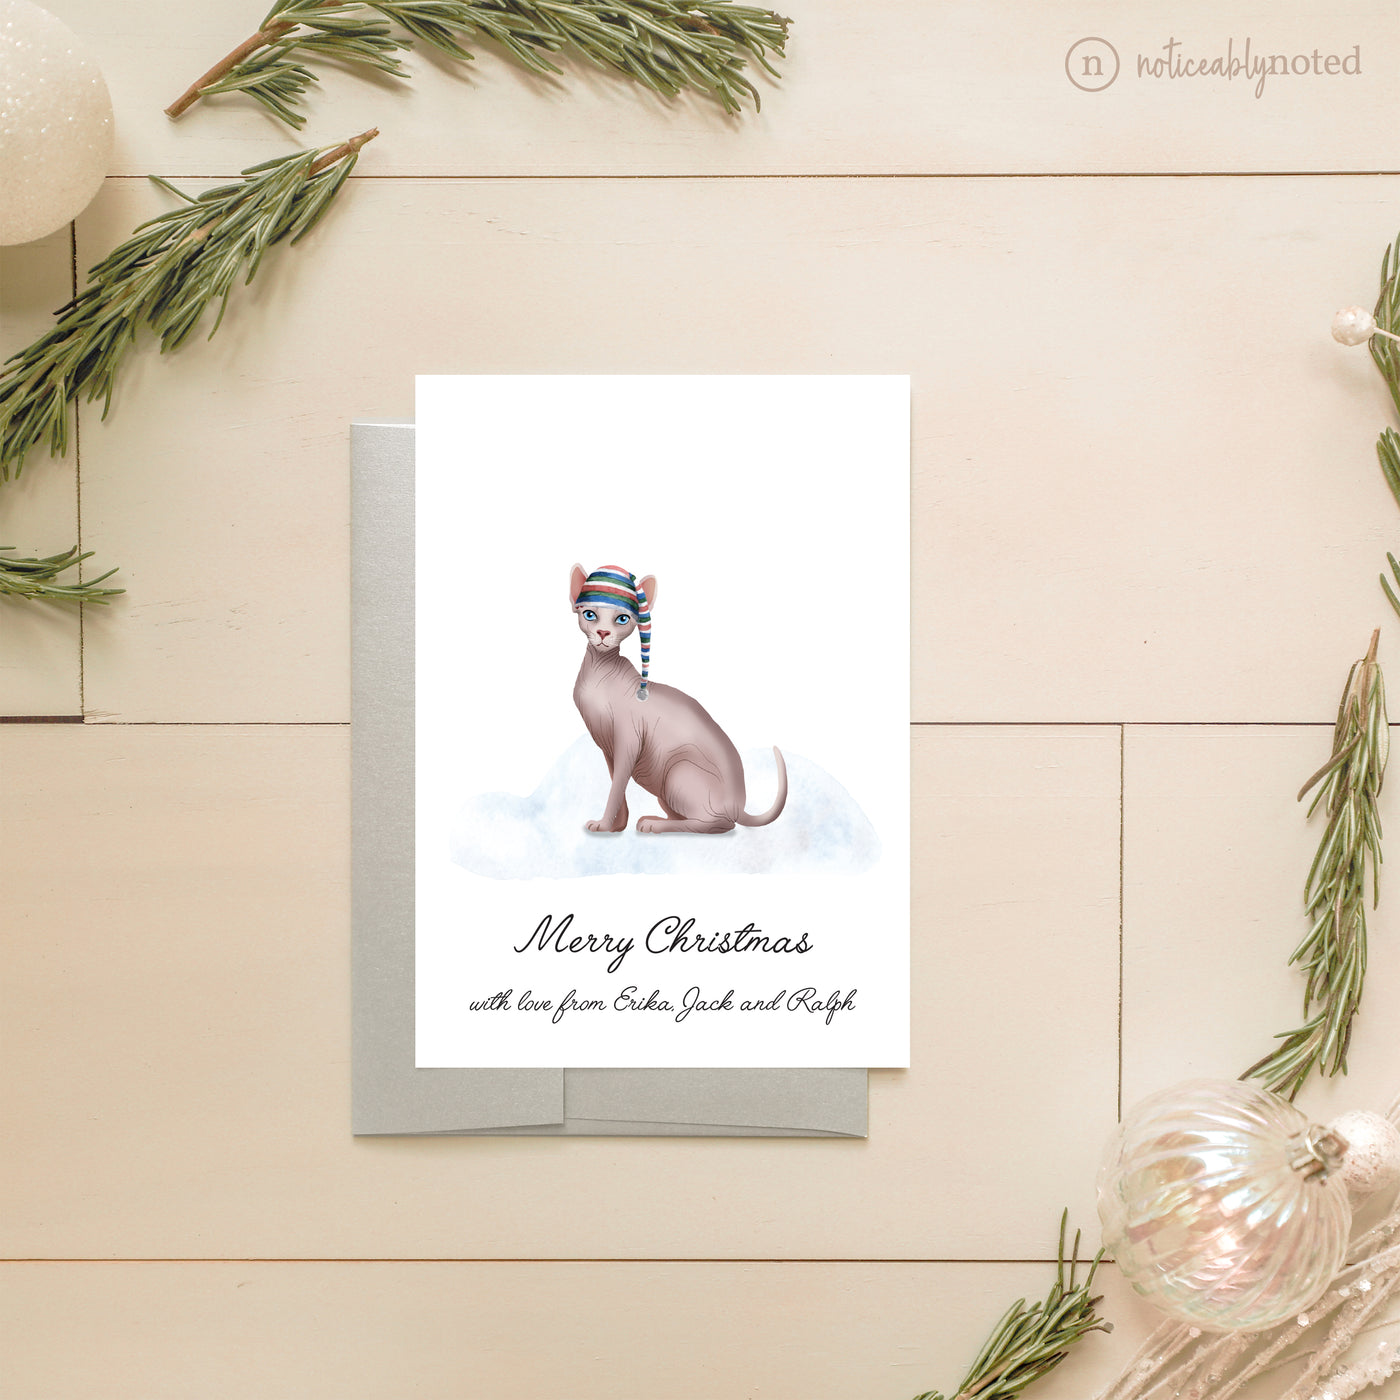 Sphynx Christmas Card | Noticeably Noted